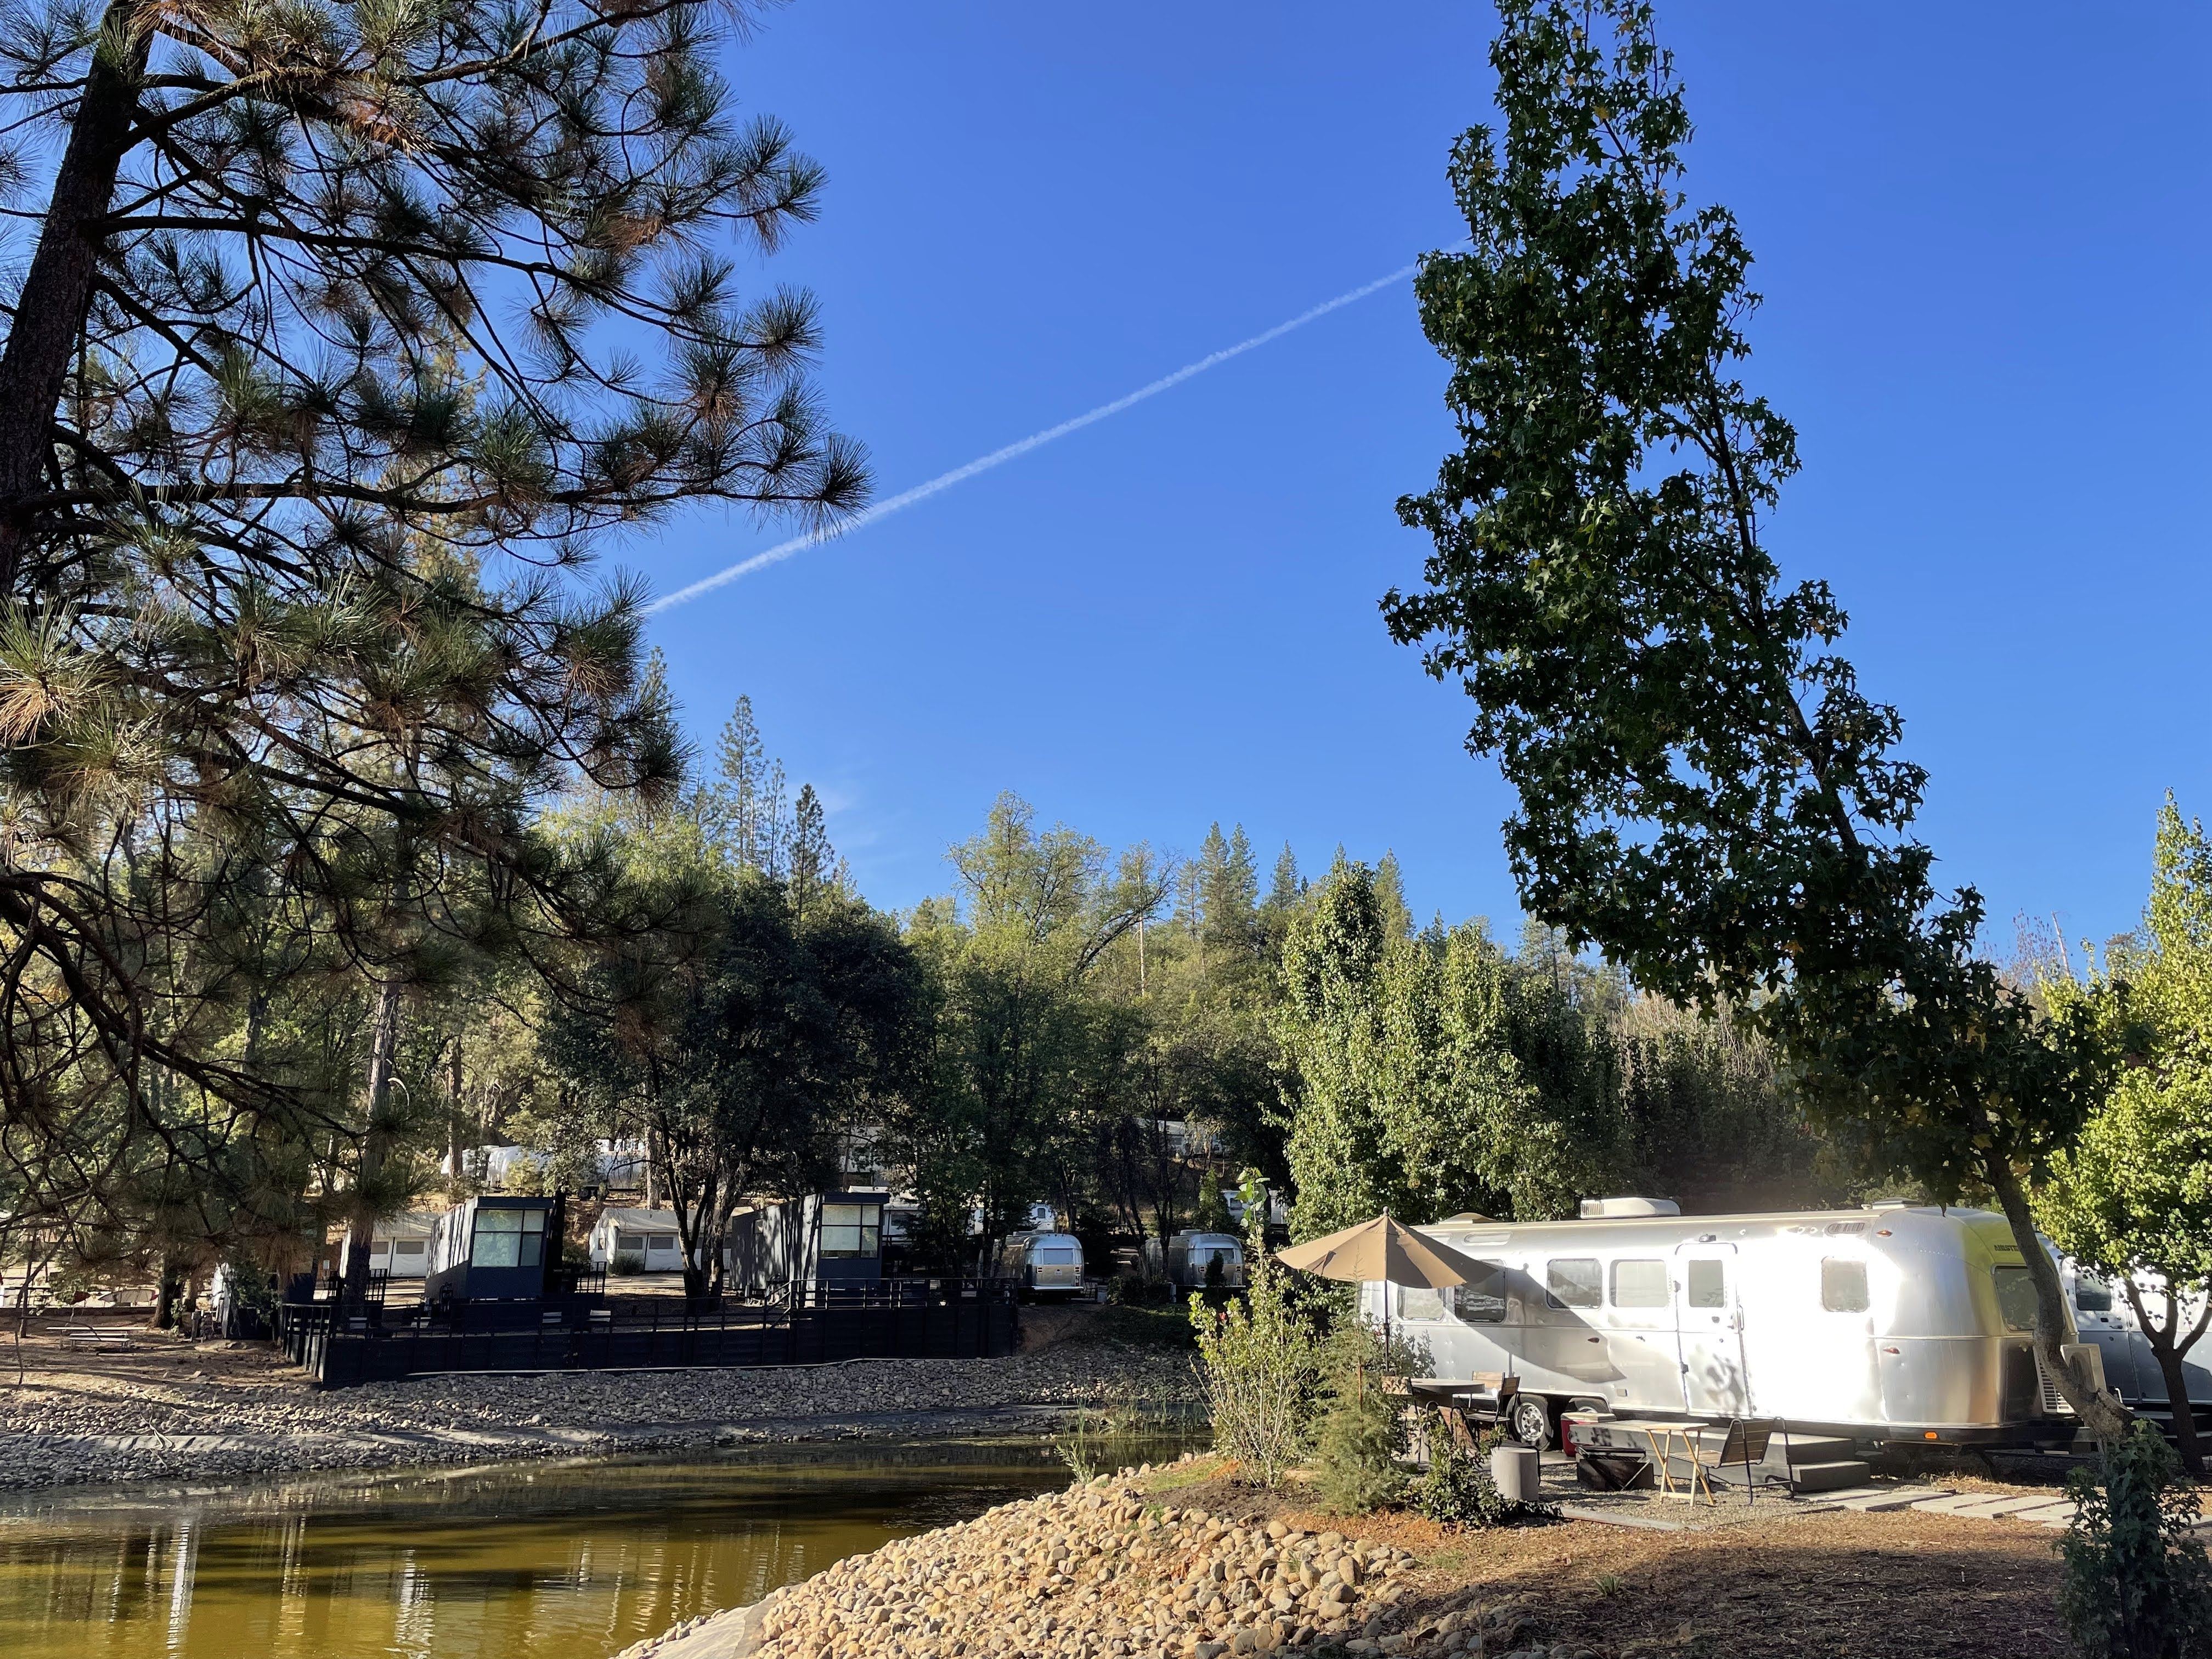 Autocamp offers luxury camping on the doorstep of Yosemite National Park, and allowed author Jeanne Tai to connect with the outdoors in a new way. Photo: Jeanne Tai